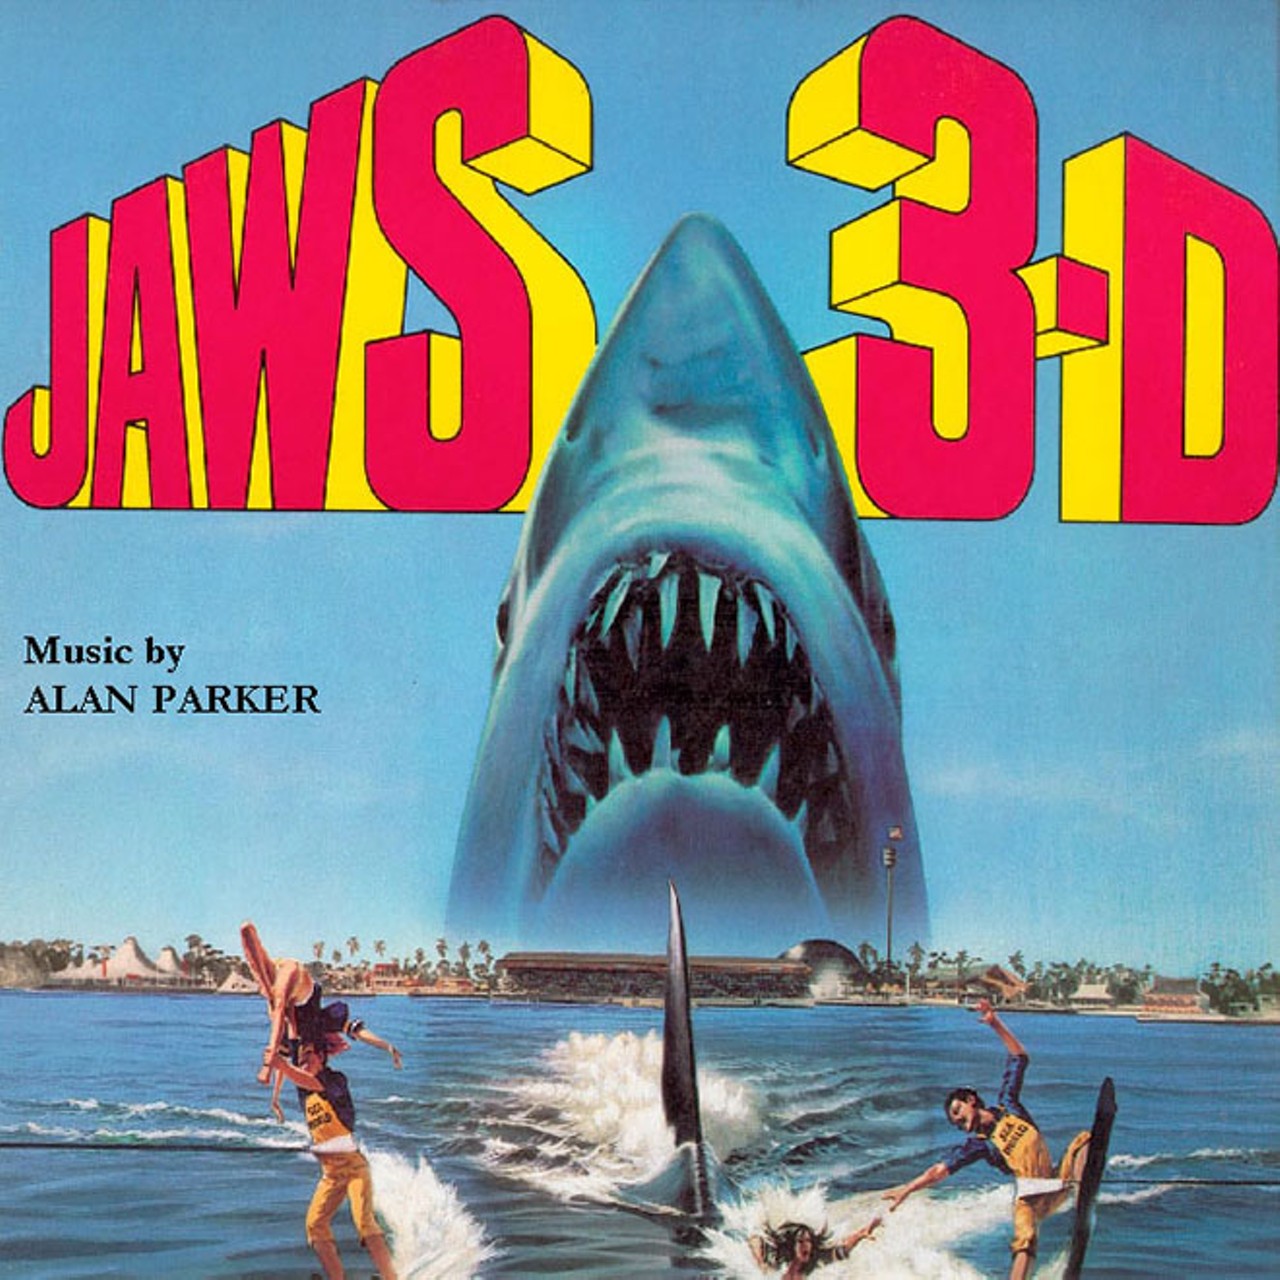 24. Jaws 3-D (1983)
Filmed in Orlando, Fla.
It's Dennis Quaid to the rescue when a 35-foot shark runs amuck after tourists get trapped in Sea World. Could this be the precursor to Sharknado?